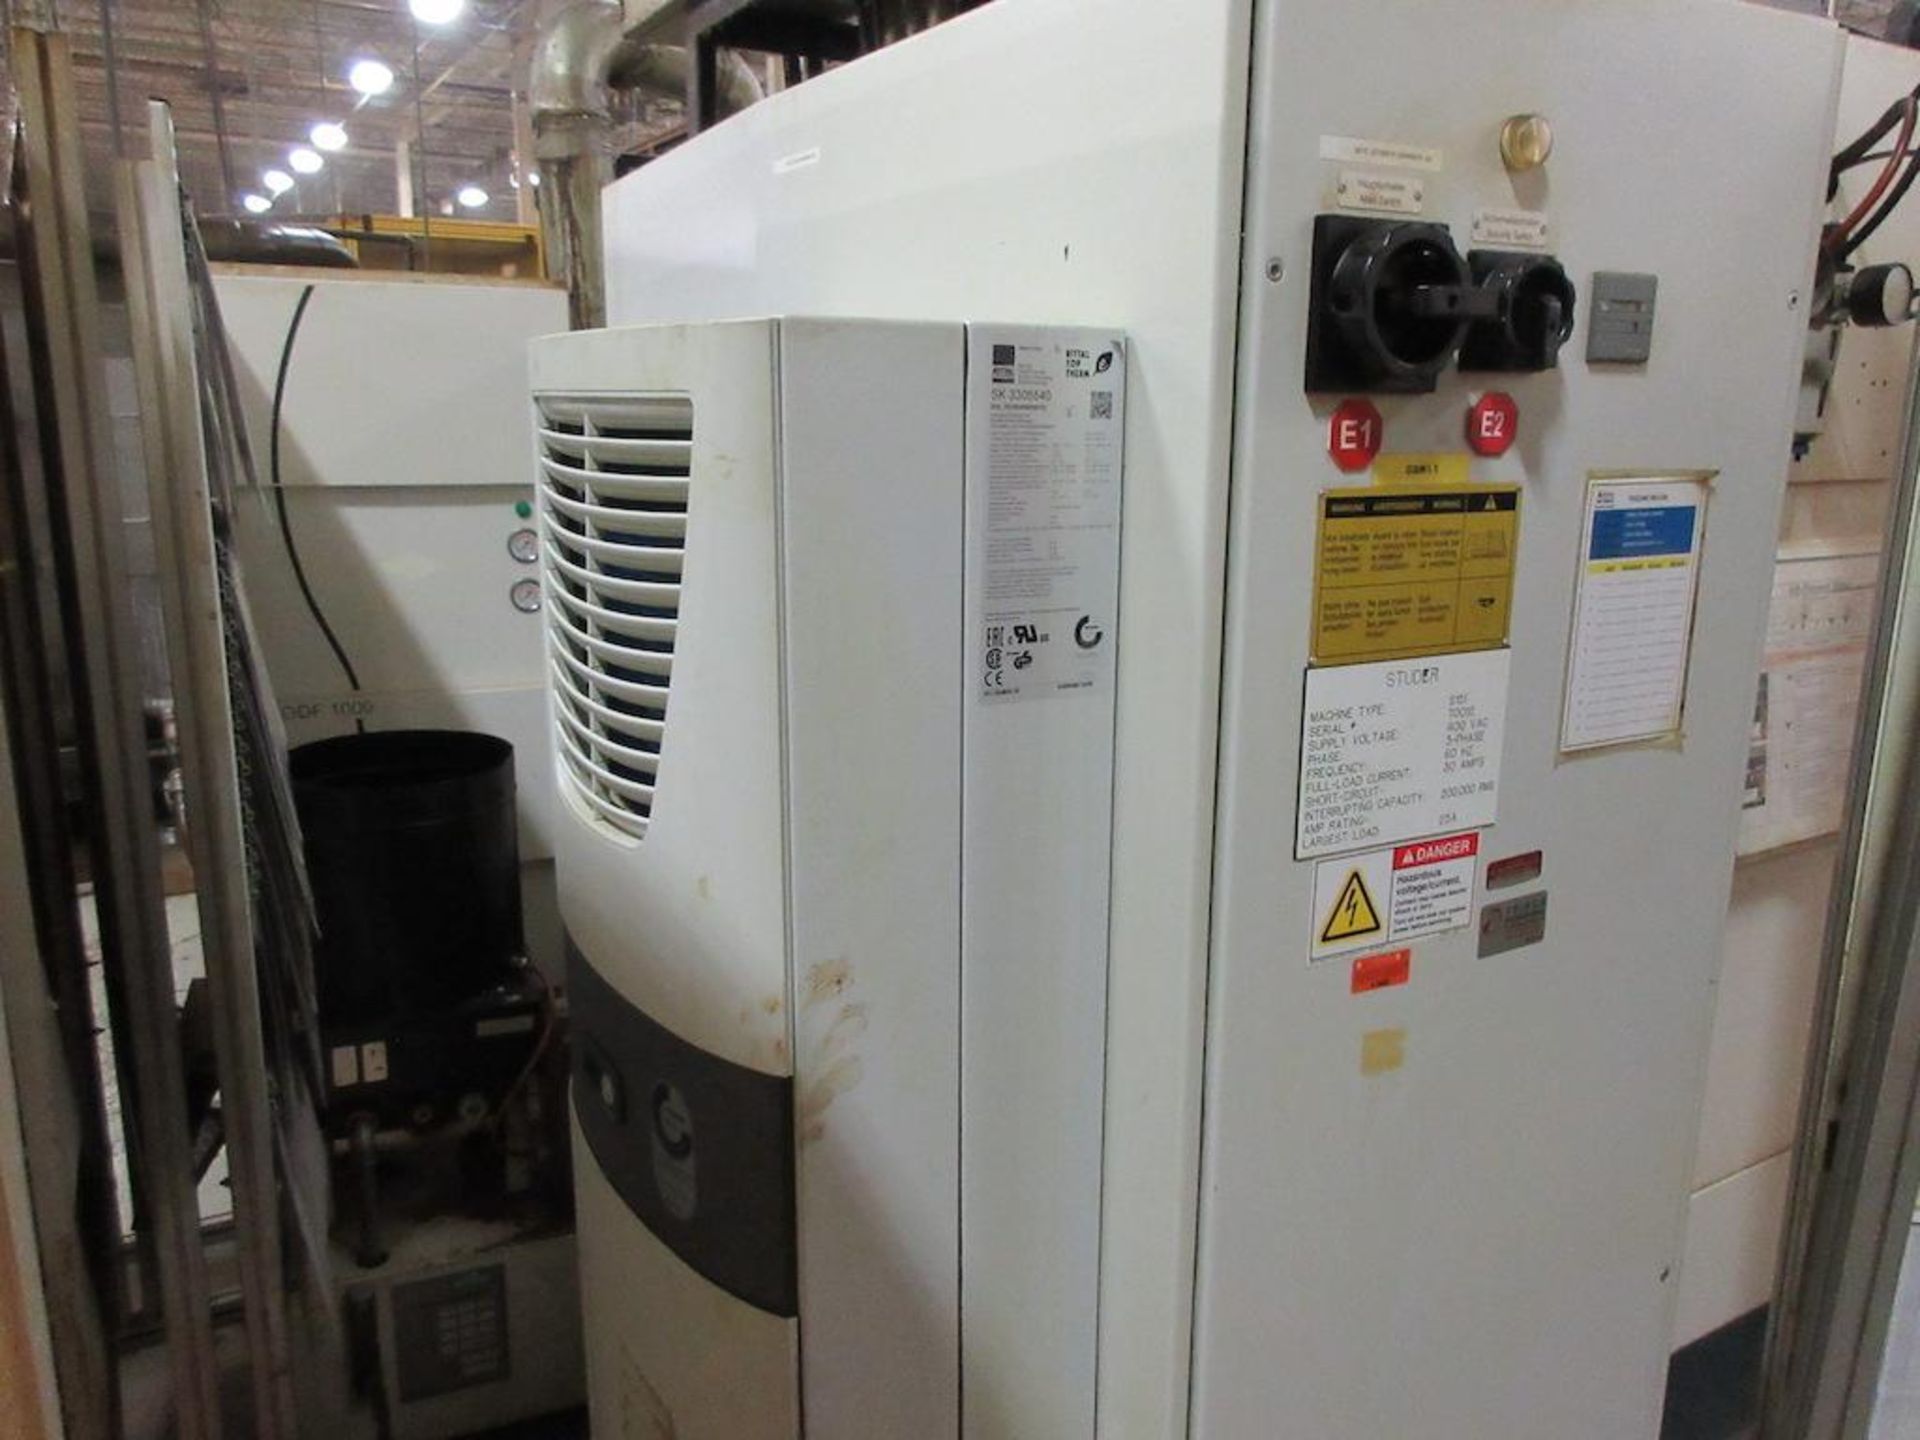 2006 STUDER, CNC Grinders, Model S151, High Frequency Drive Spindle, Swing diameter 14.17", center - Image 10 of 11